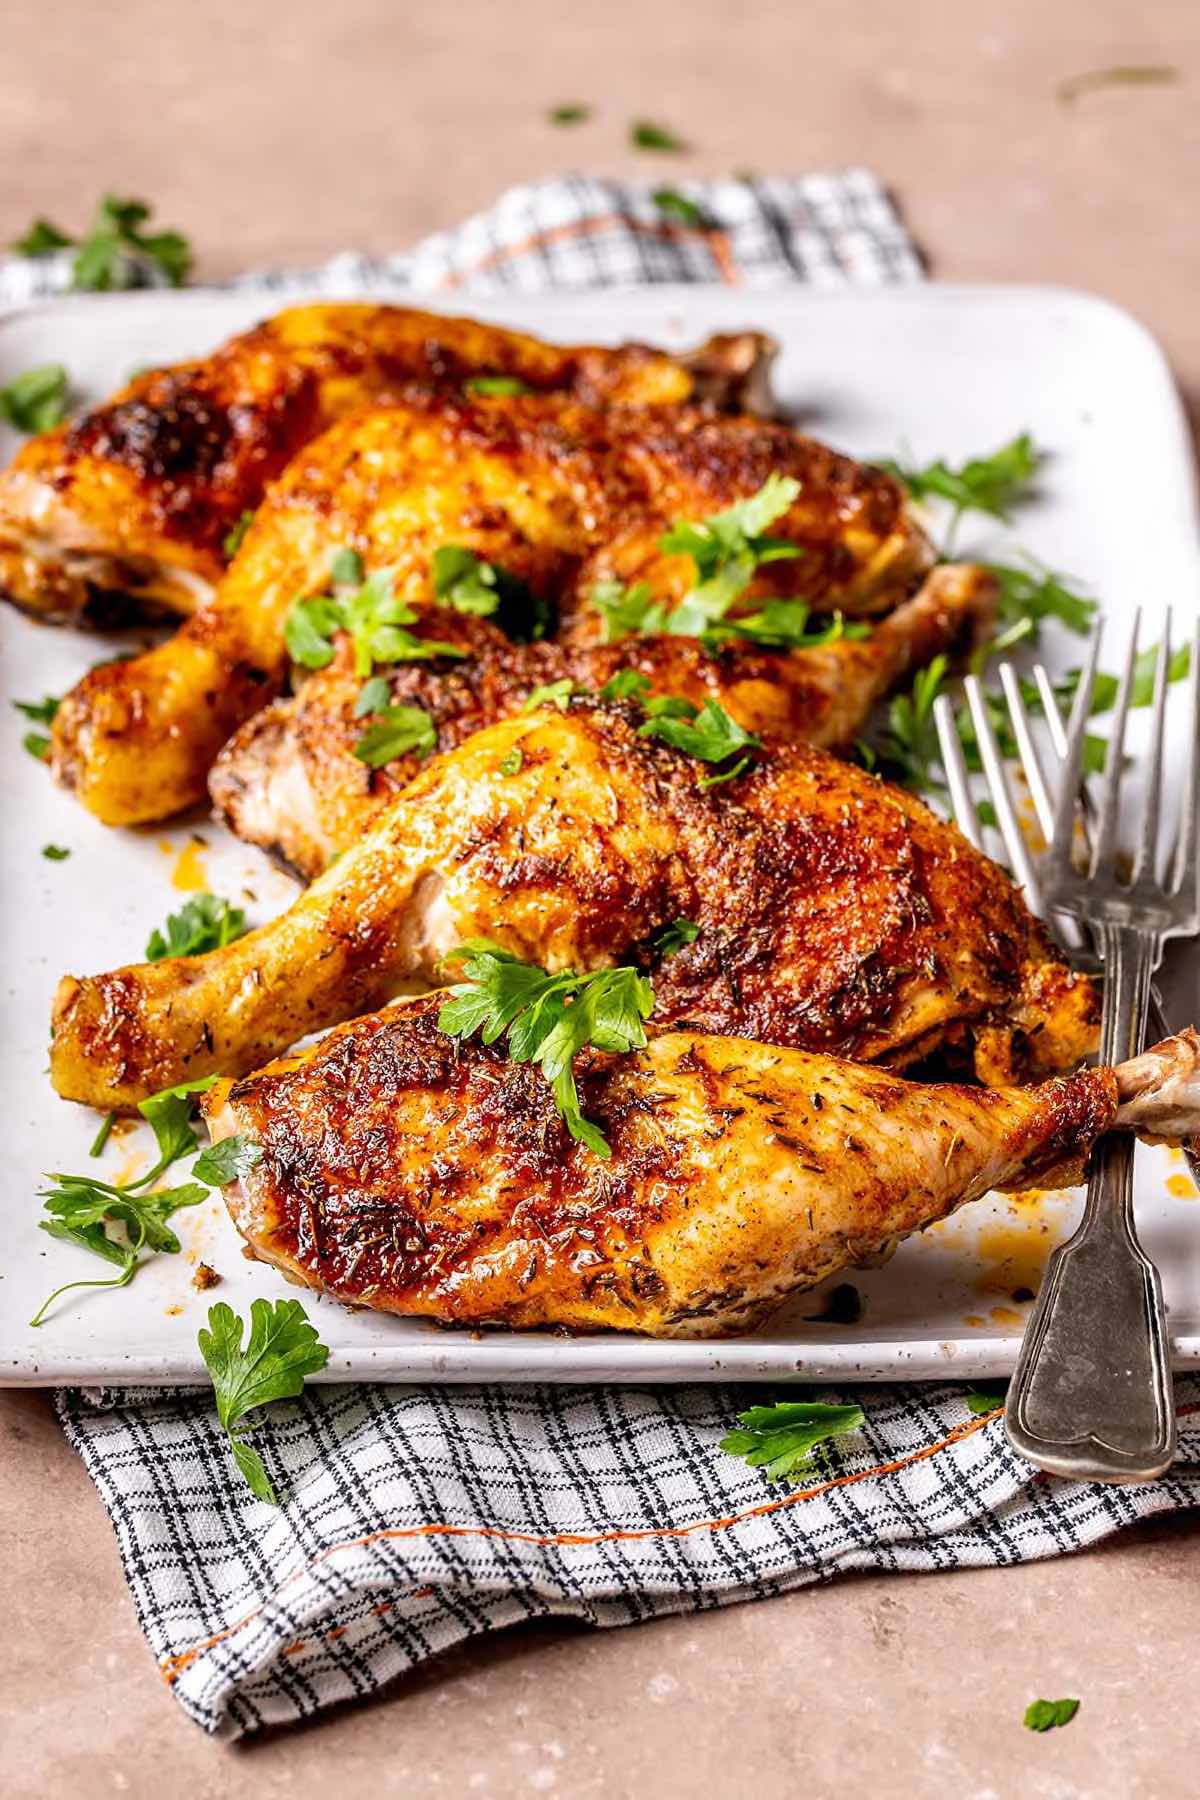 crispy baked chicken leg quarters with parsley on top.